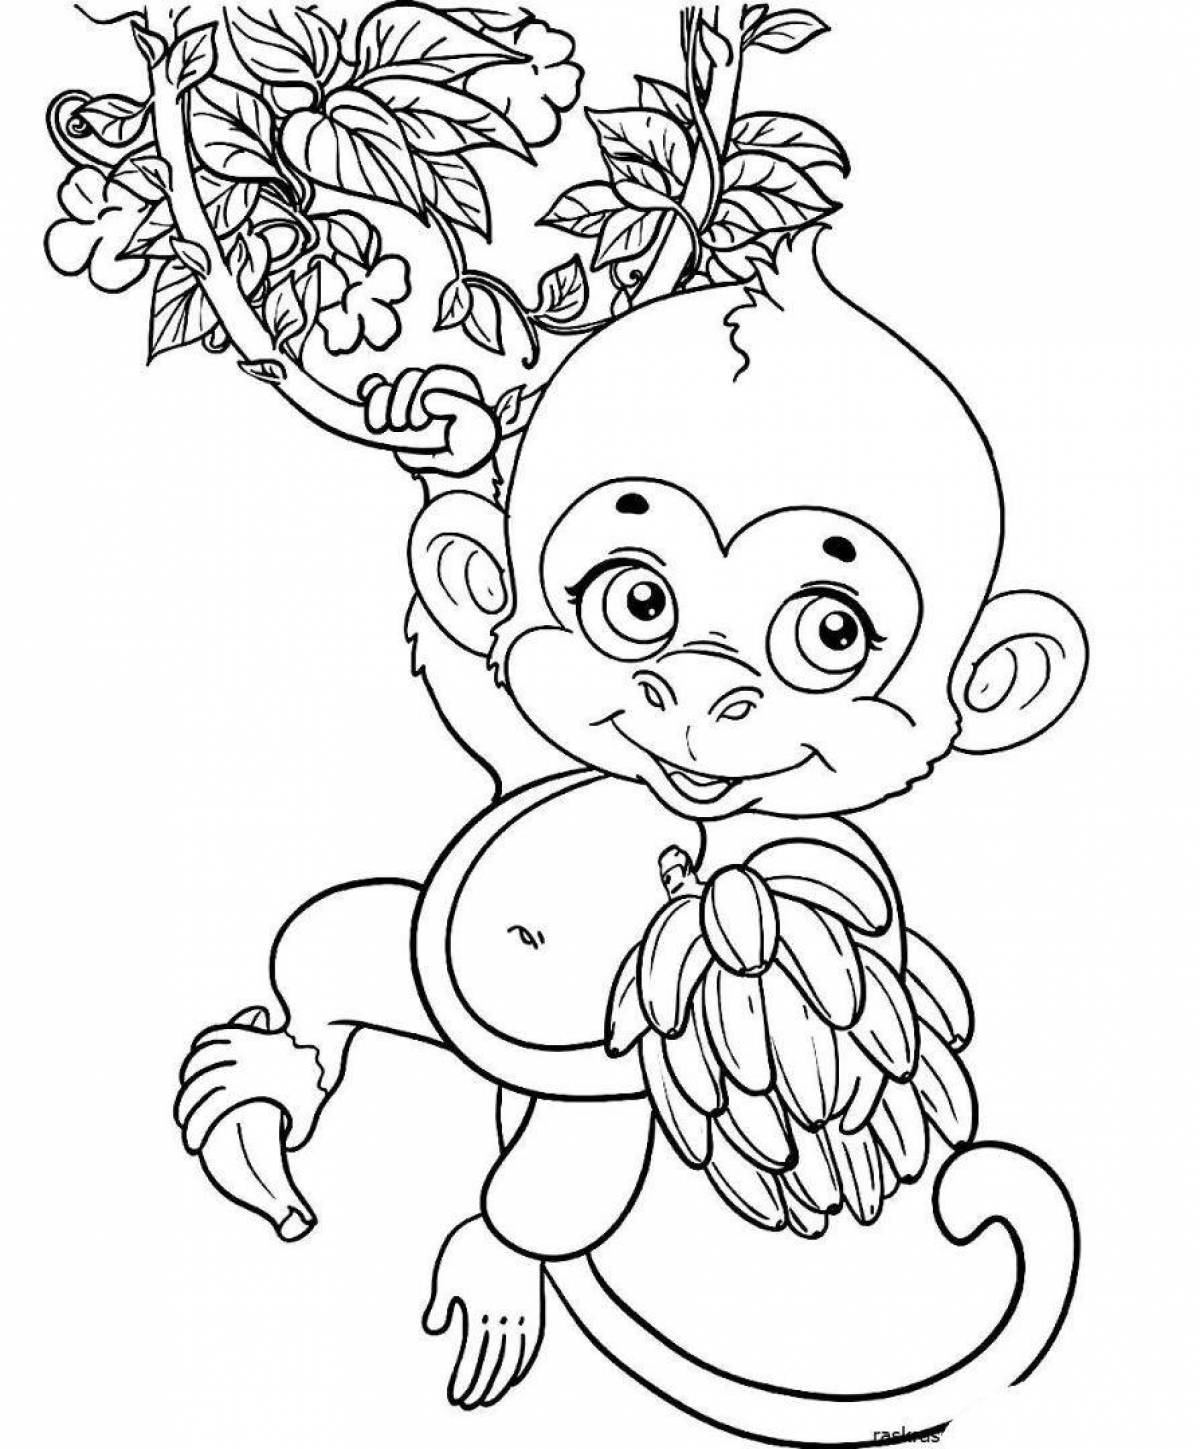 Cute monkey drawing for kids